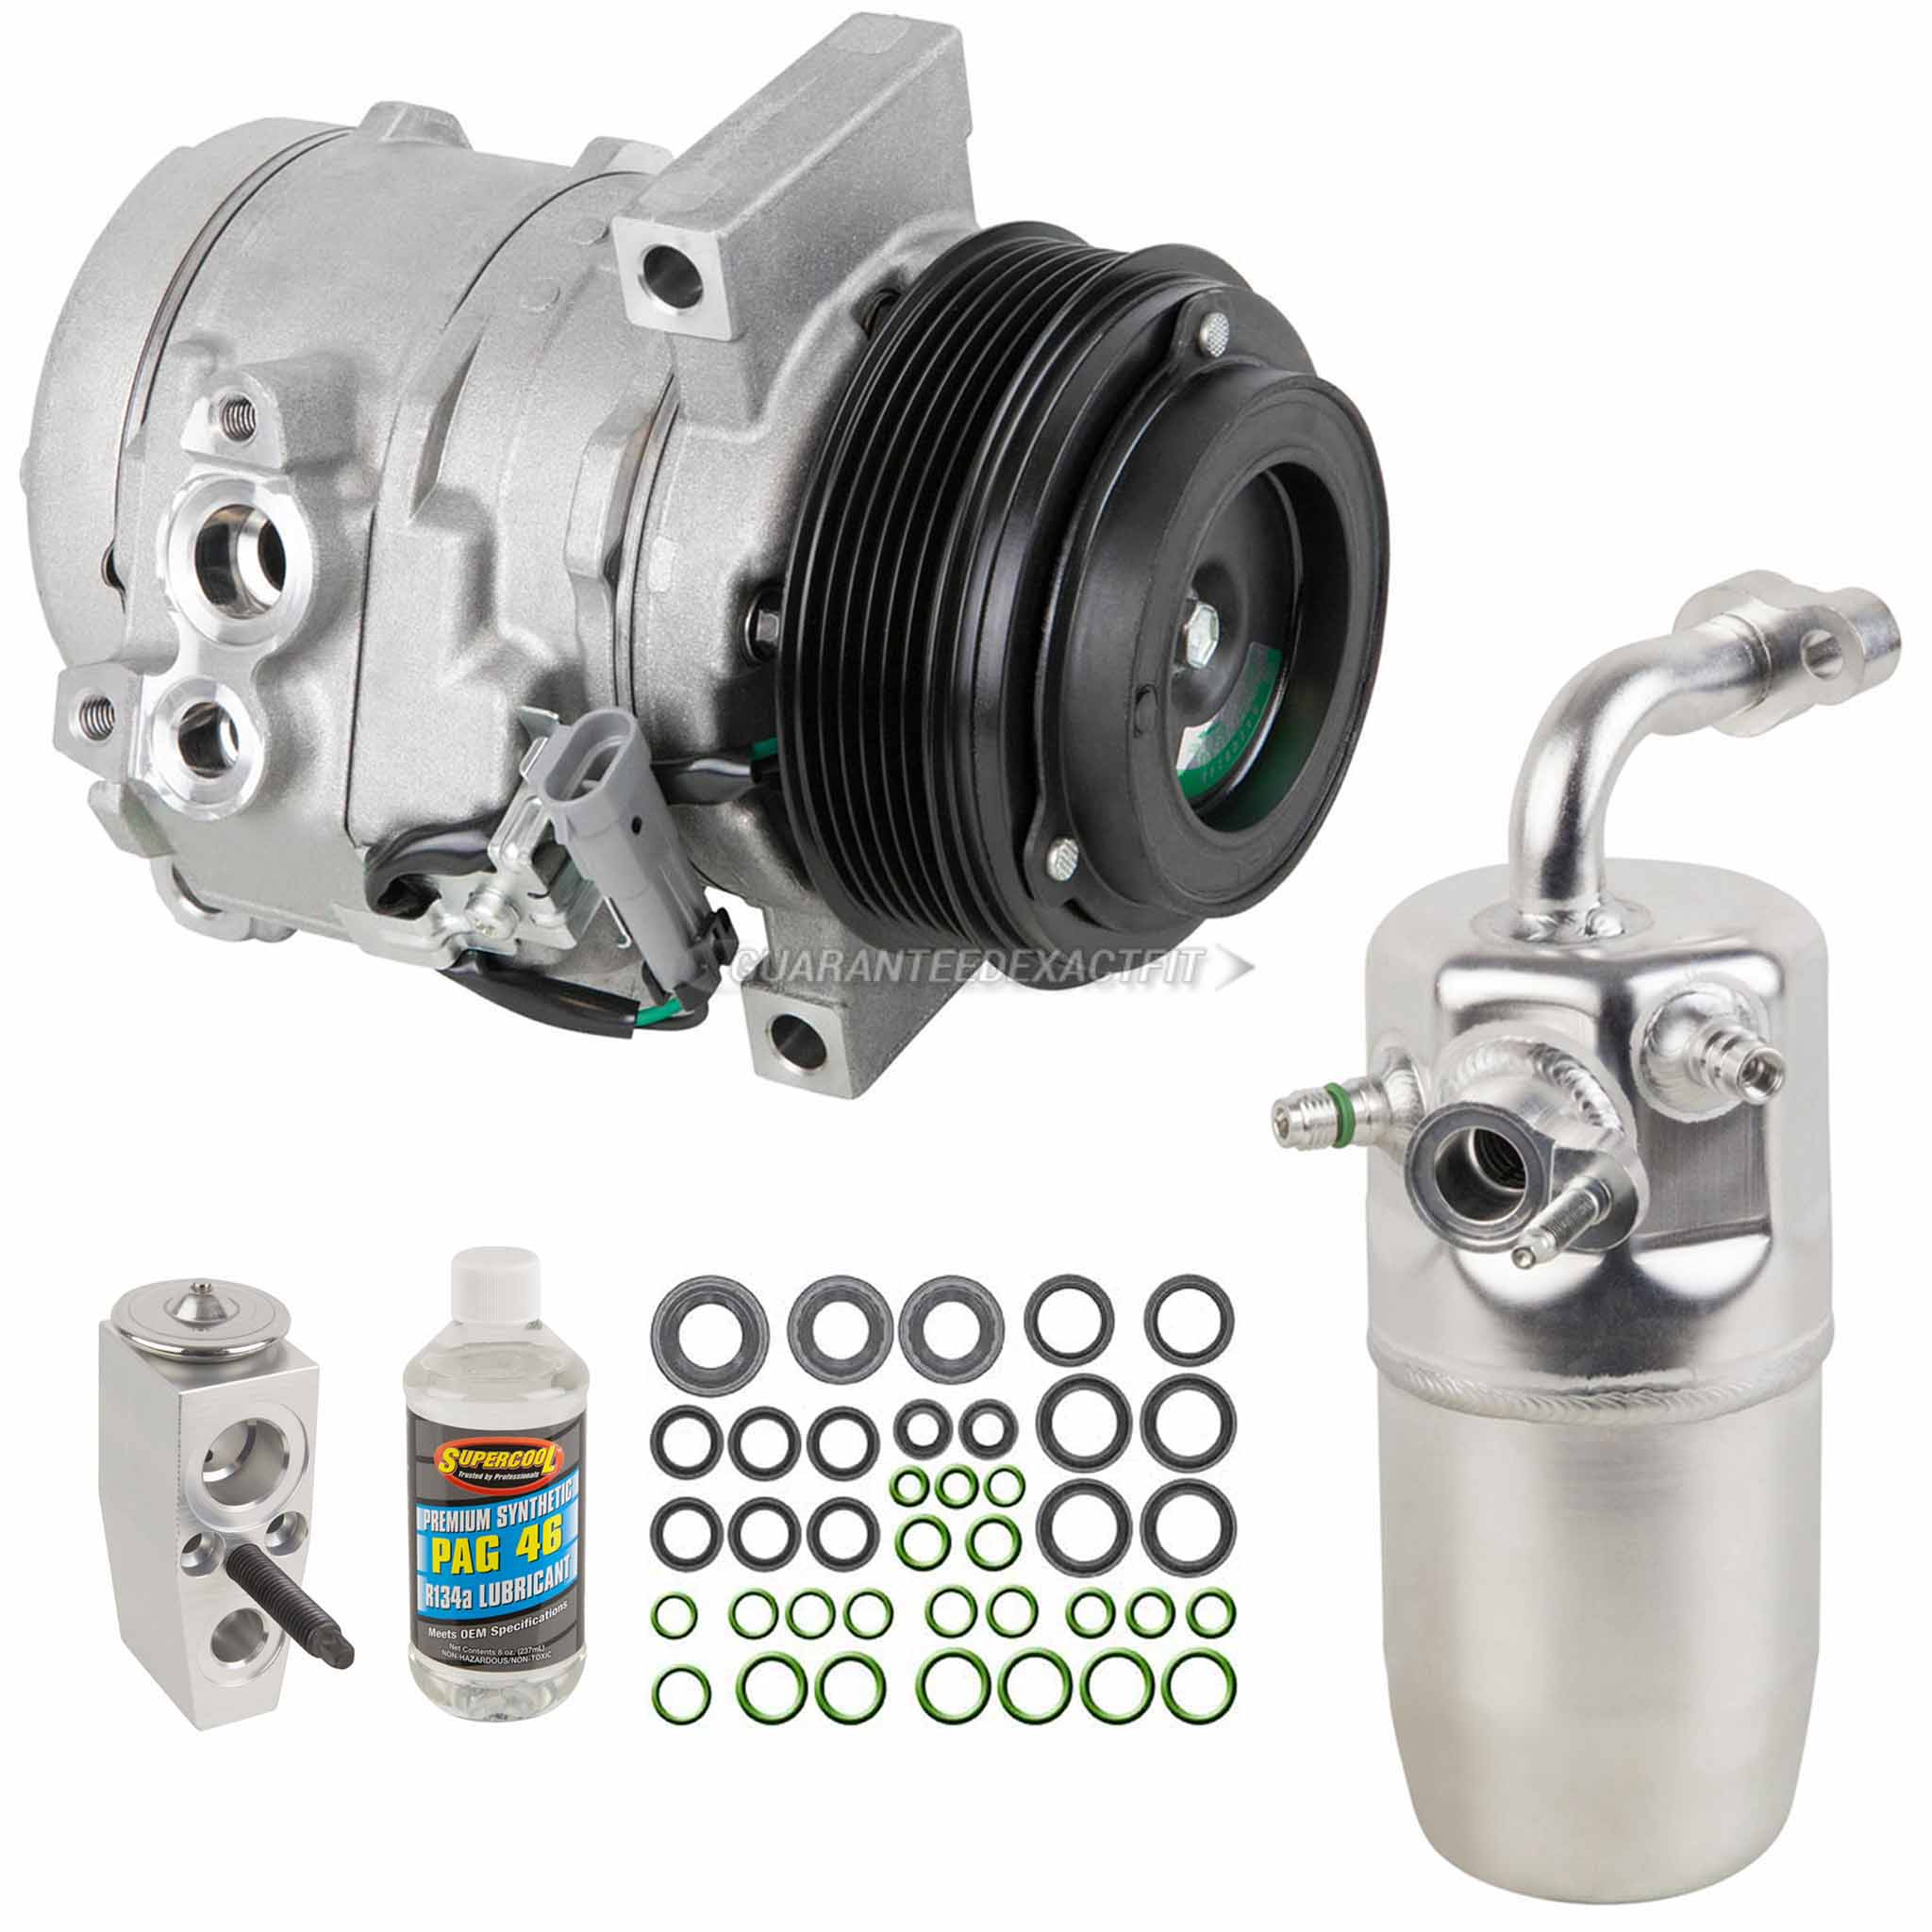 2018 Gmc sierra 3500 hd a/c compressor and components kit 